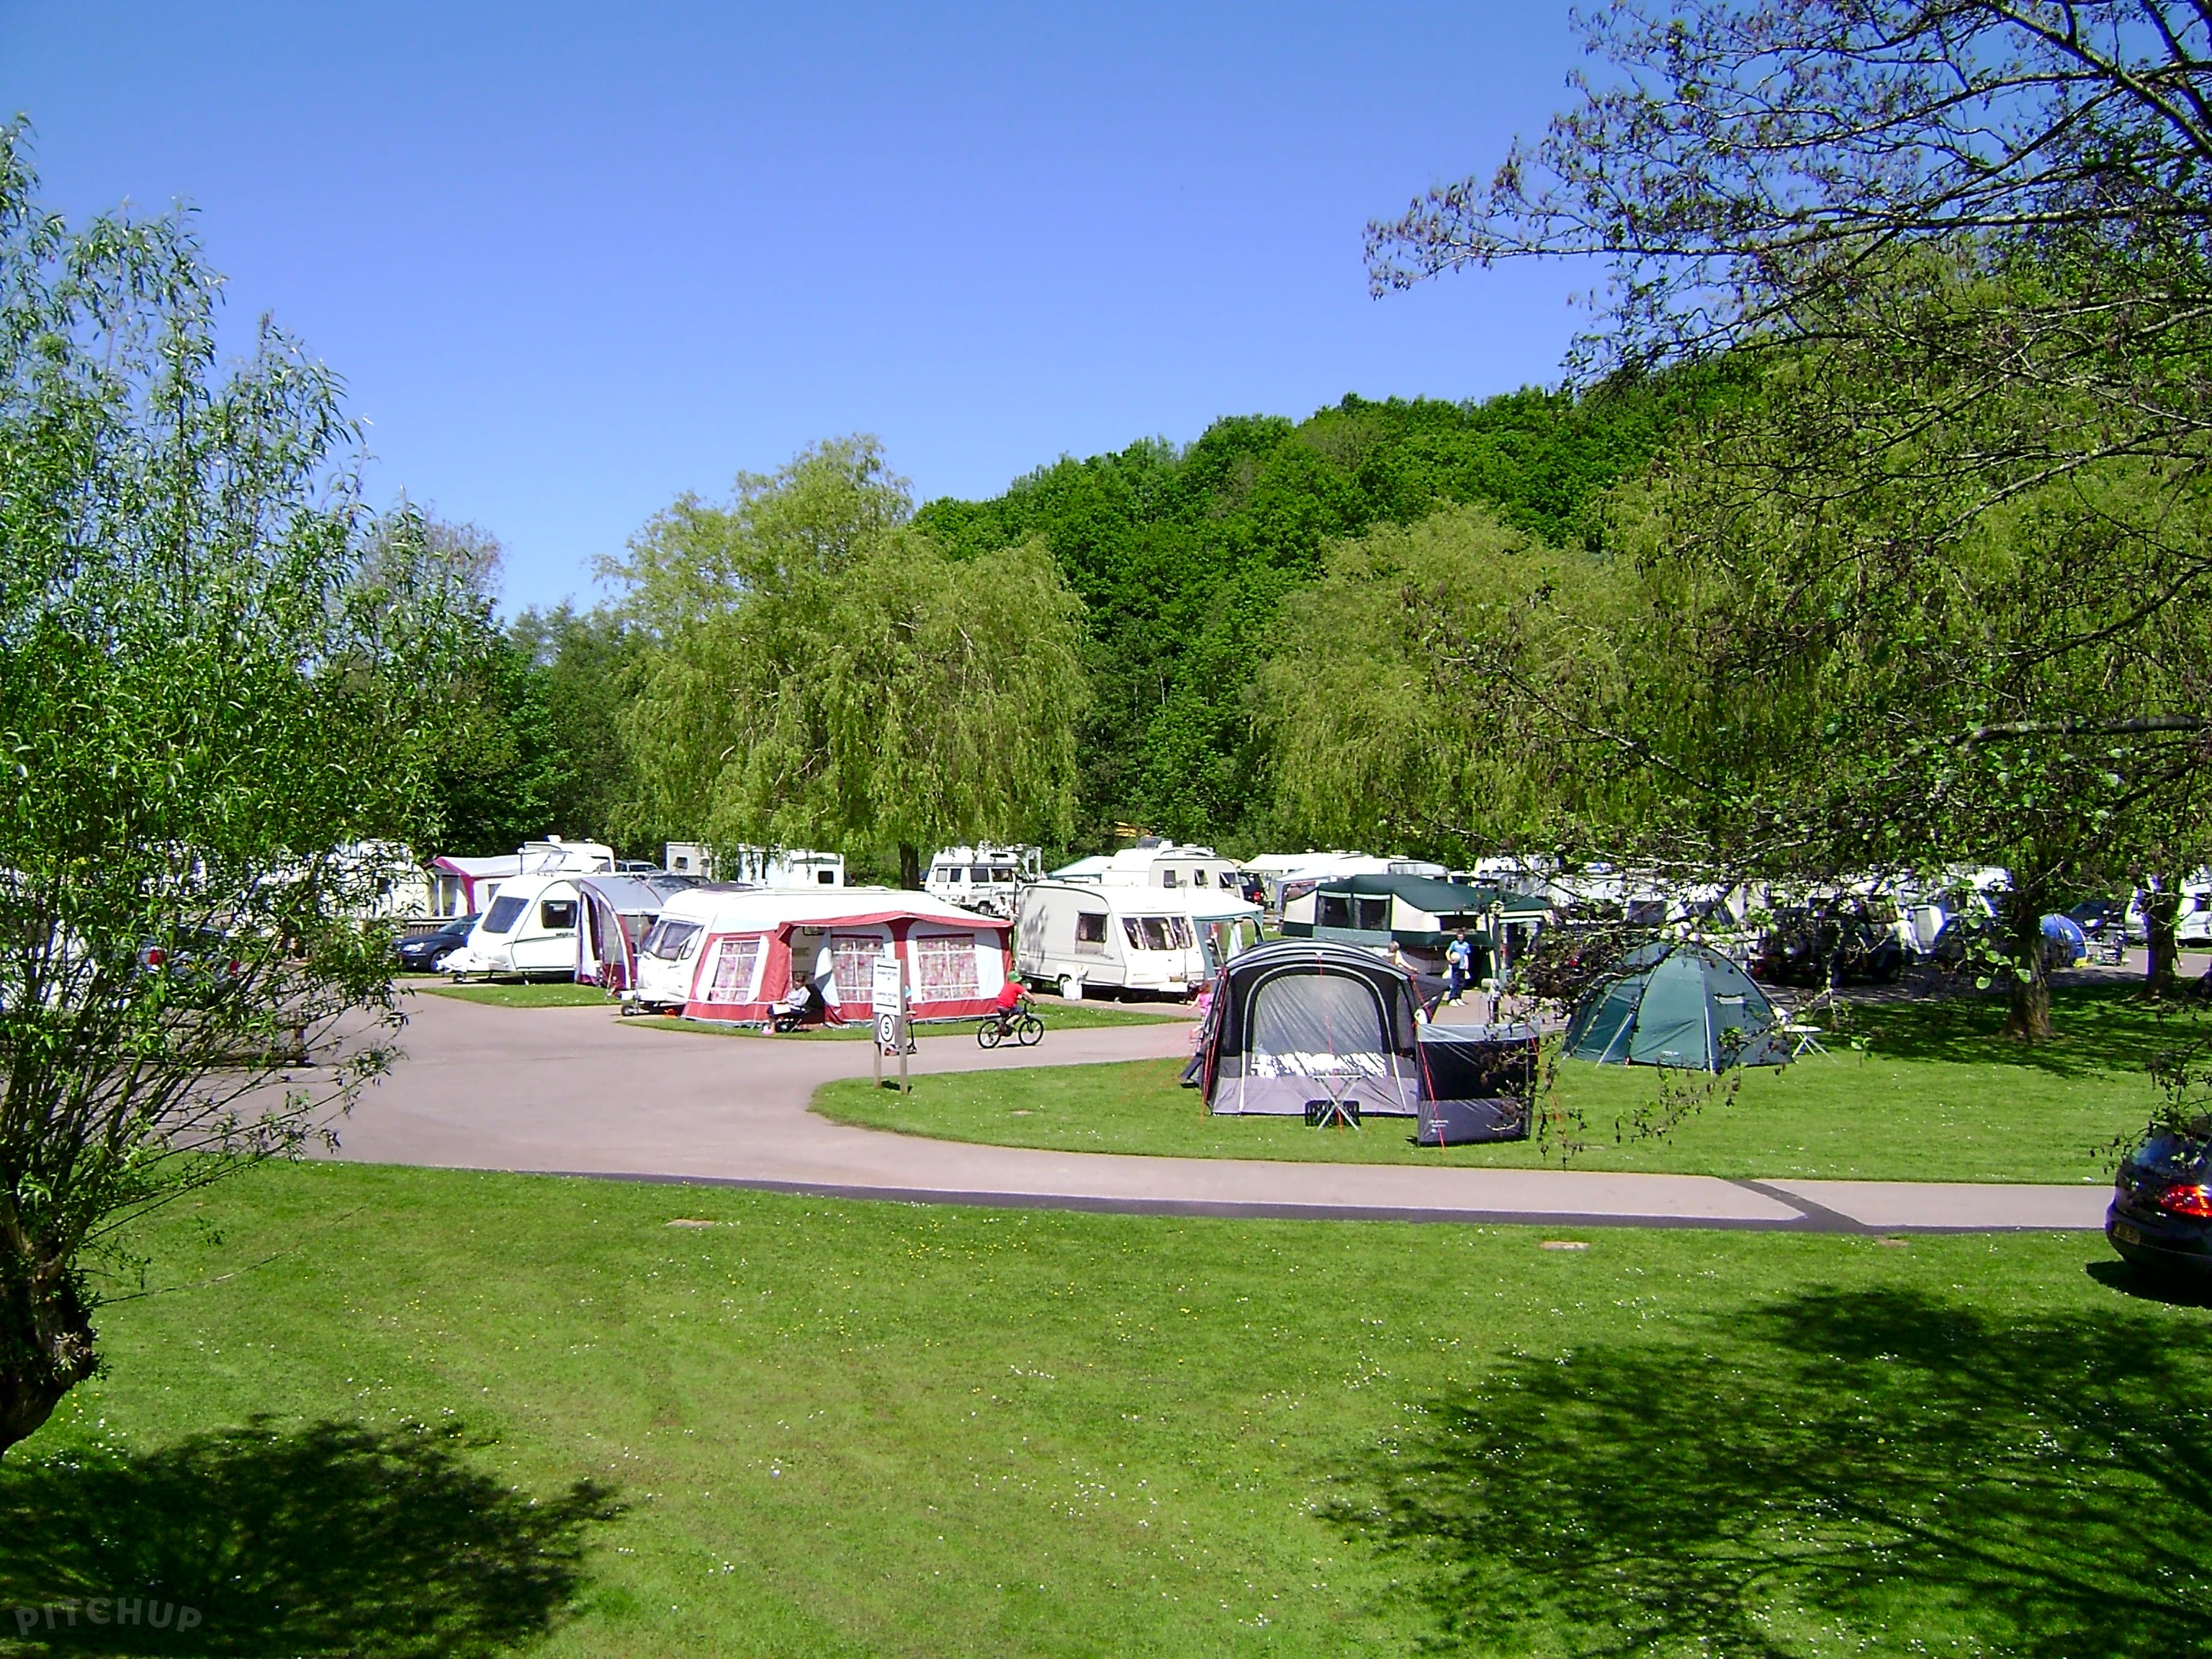 View Bridge Caravan Park and Camping Site in Monmouthshire, Wales. 